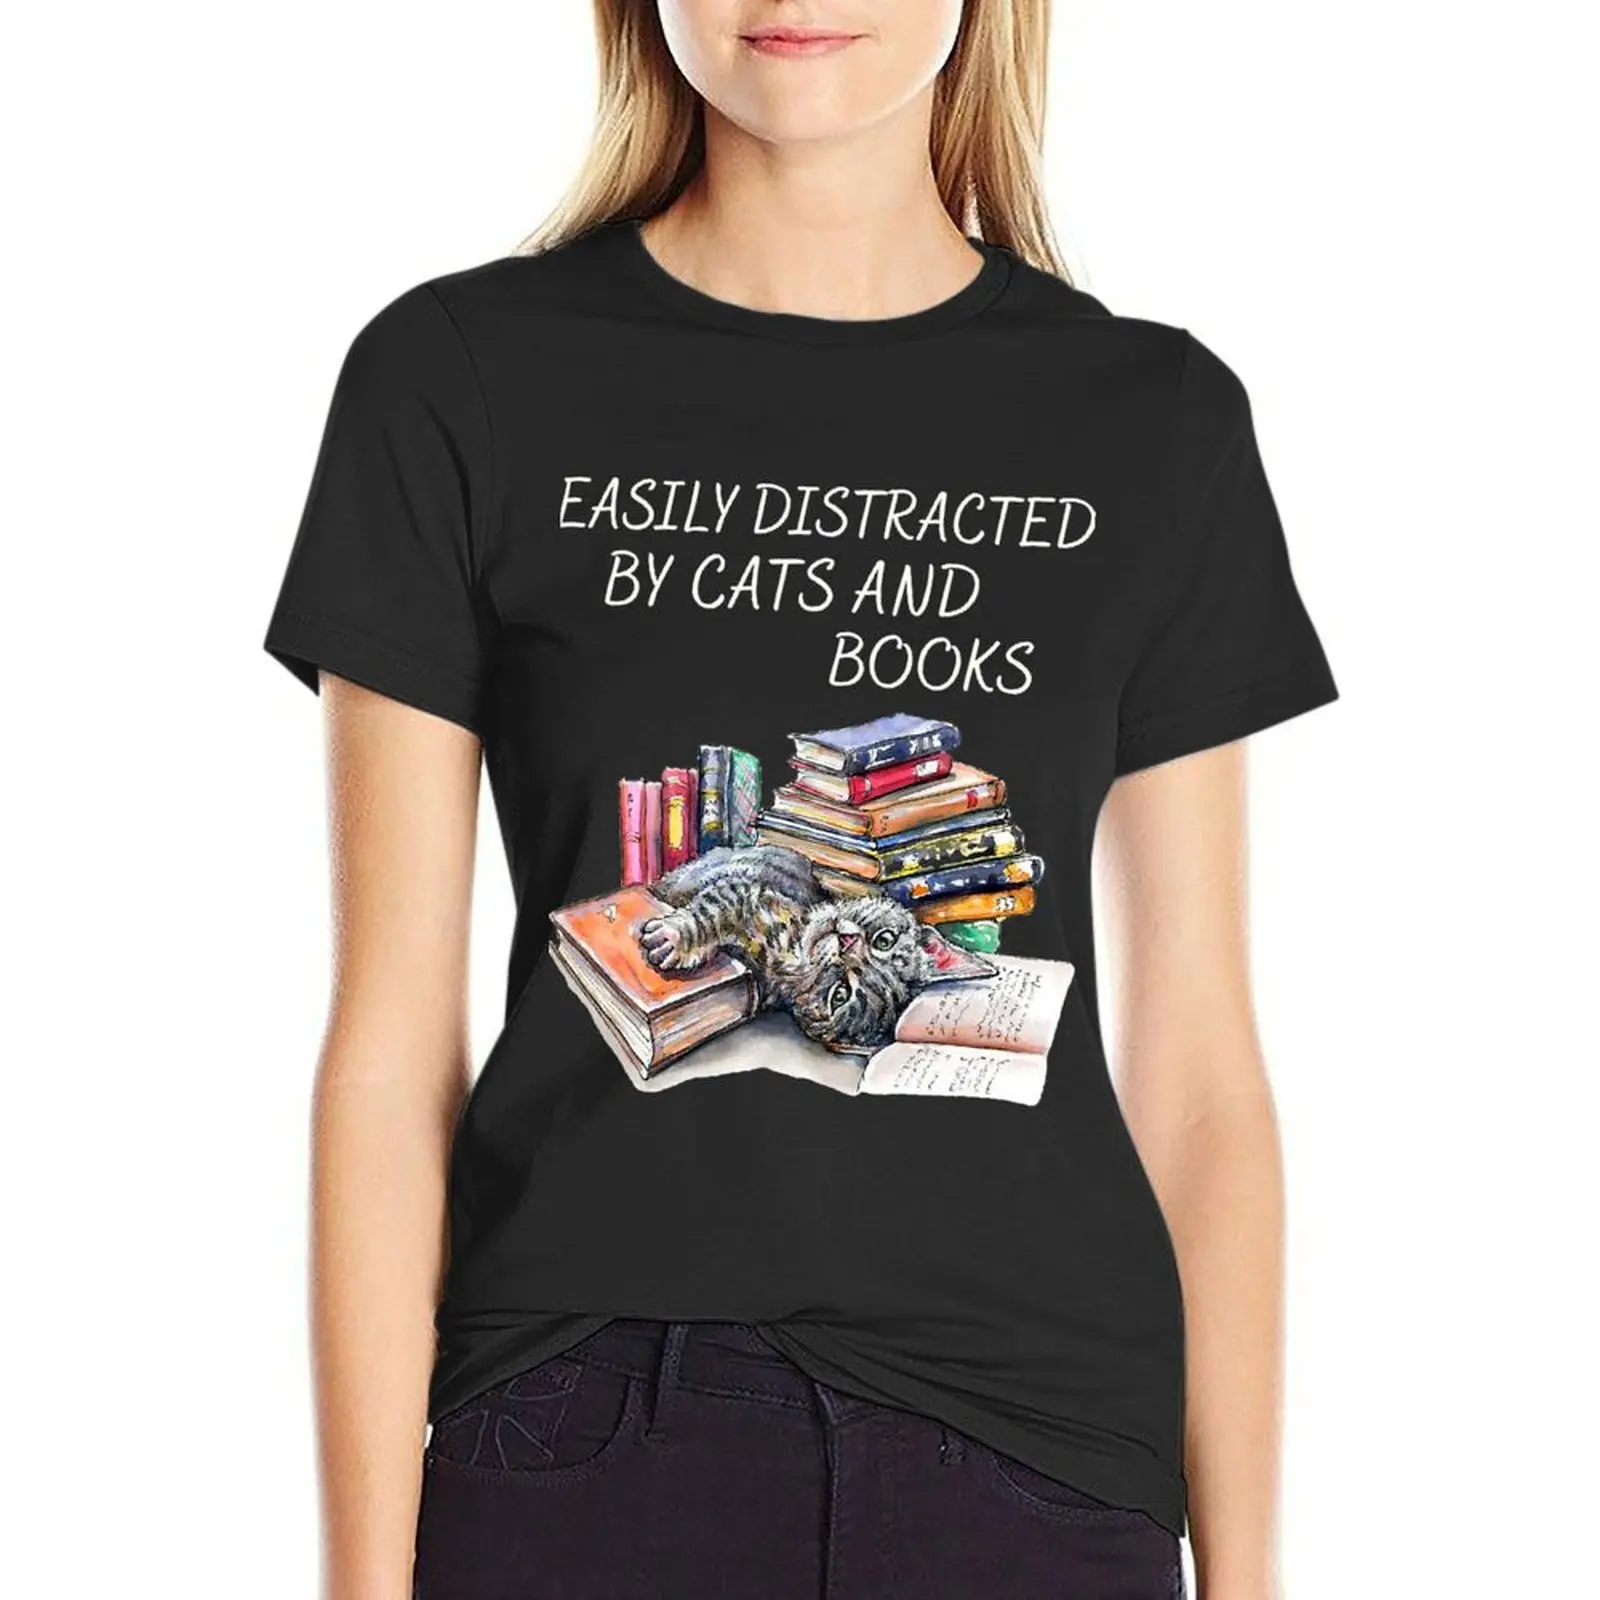 

Easily Distracted By Cats _ Books - Cat _ Book Lover T-shirt animal print shirt for girls lady clothes Summer Women's clothing